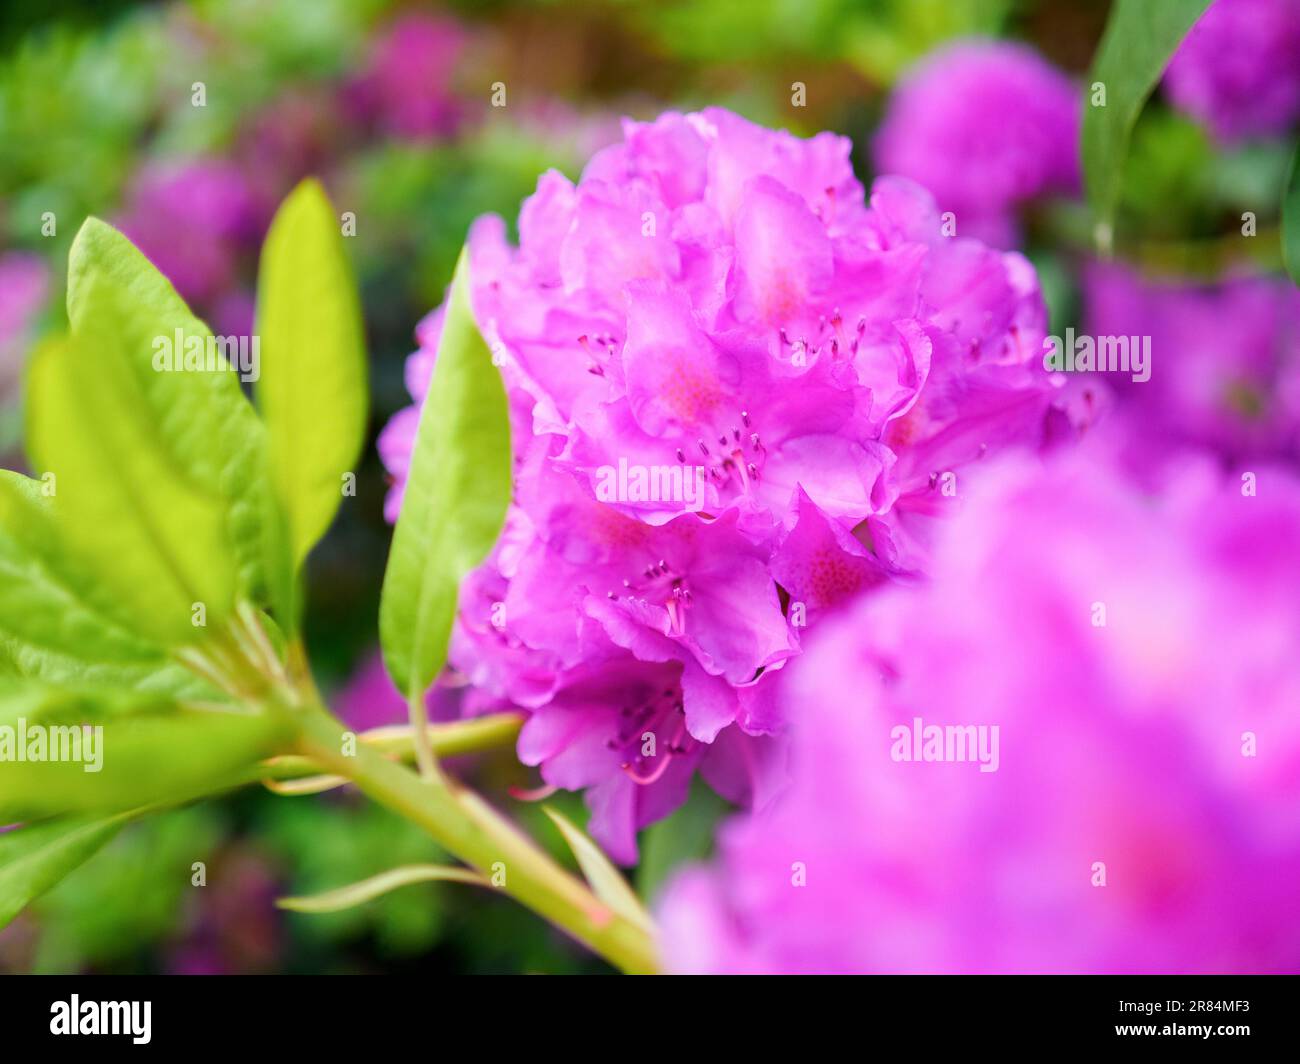 purple blooming rhododendron shrub, flowering plant, close up photo Stock Photo